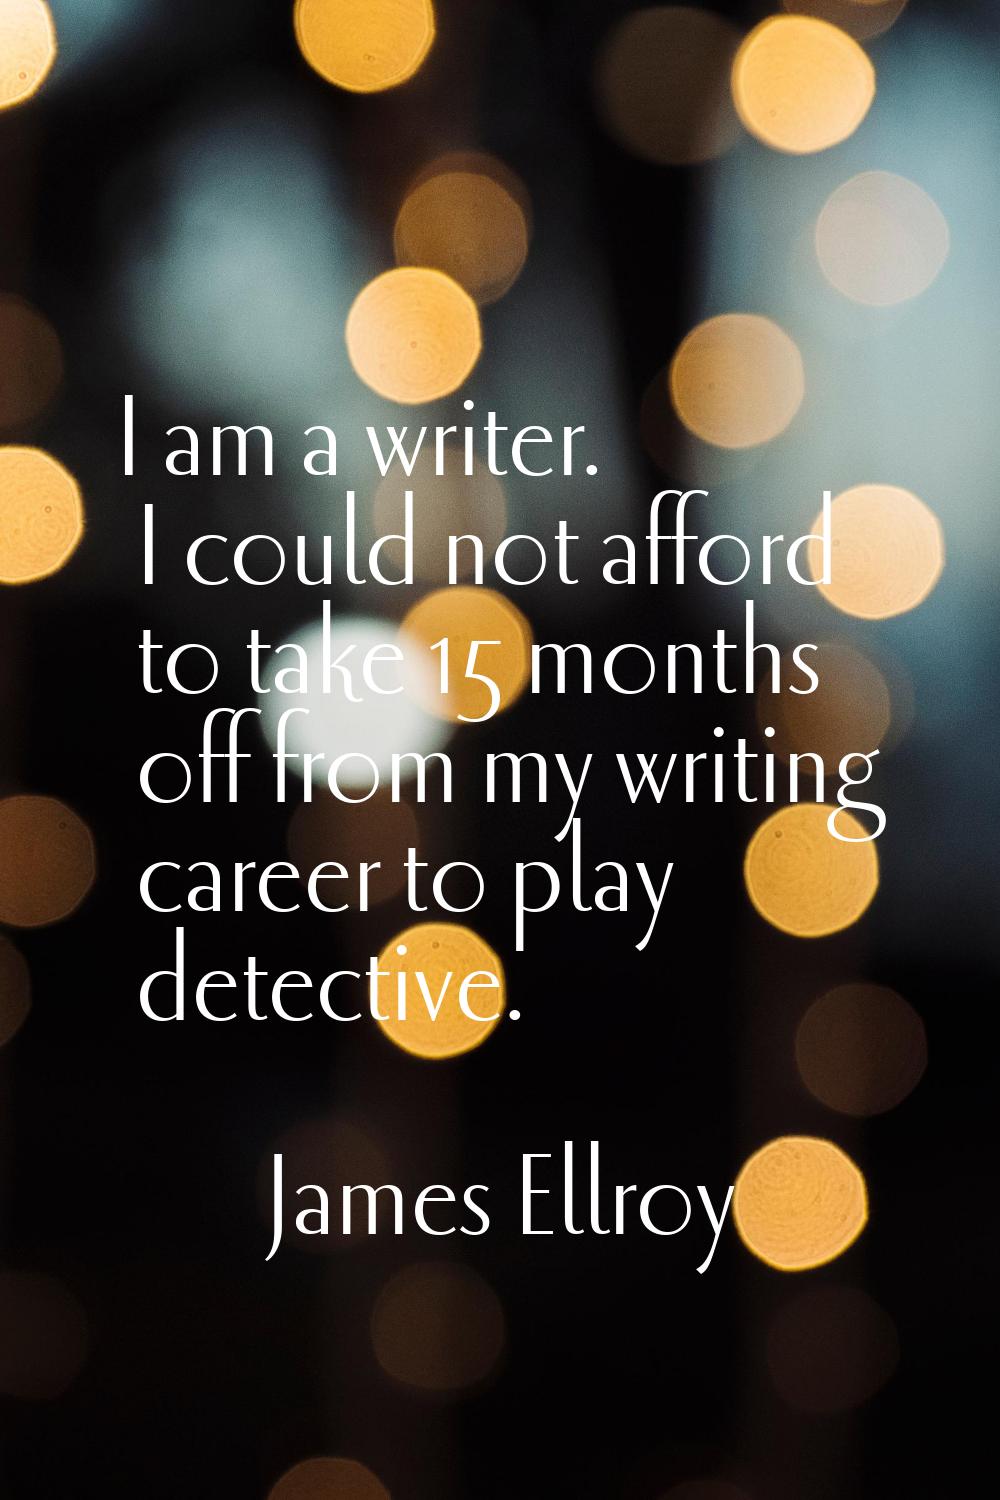 I am a writer. I could not afford to take 15 months off from my writing career to play detective.